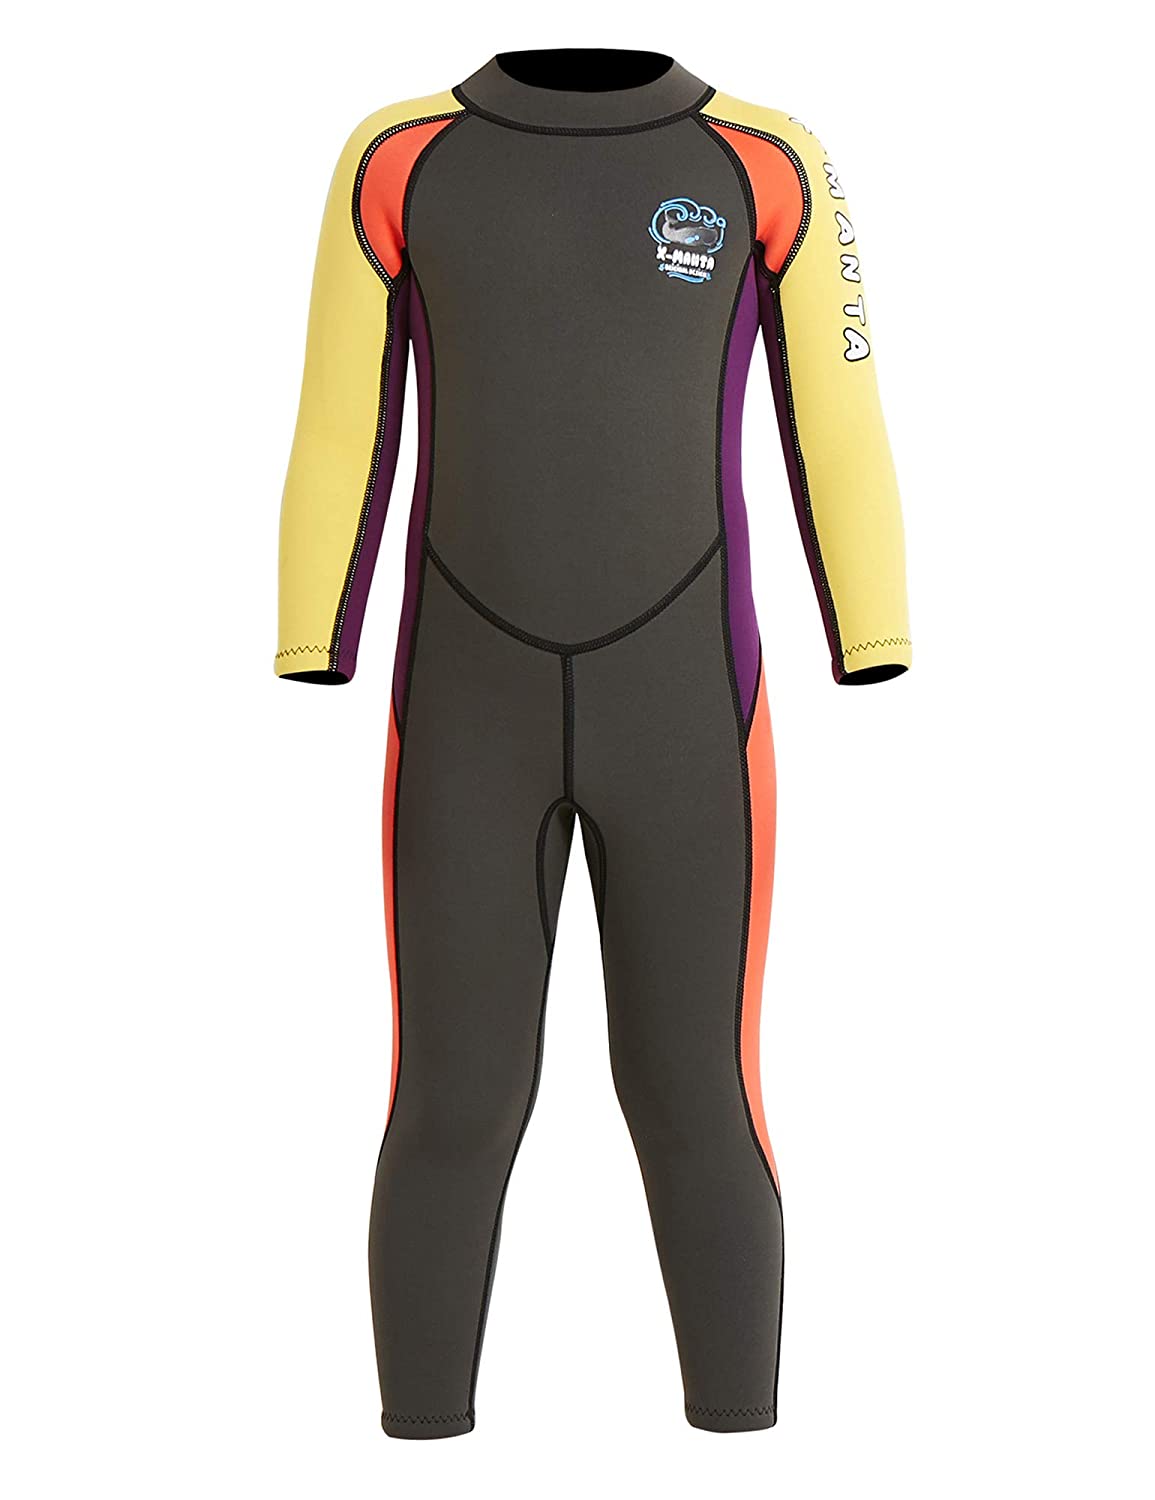 DIVE & SAIL Kids Wetsuit 2.5mm Neoprene Keep Warm for Diving Swimming Canoeing UV Protection by DIVE & SAIL